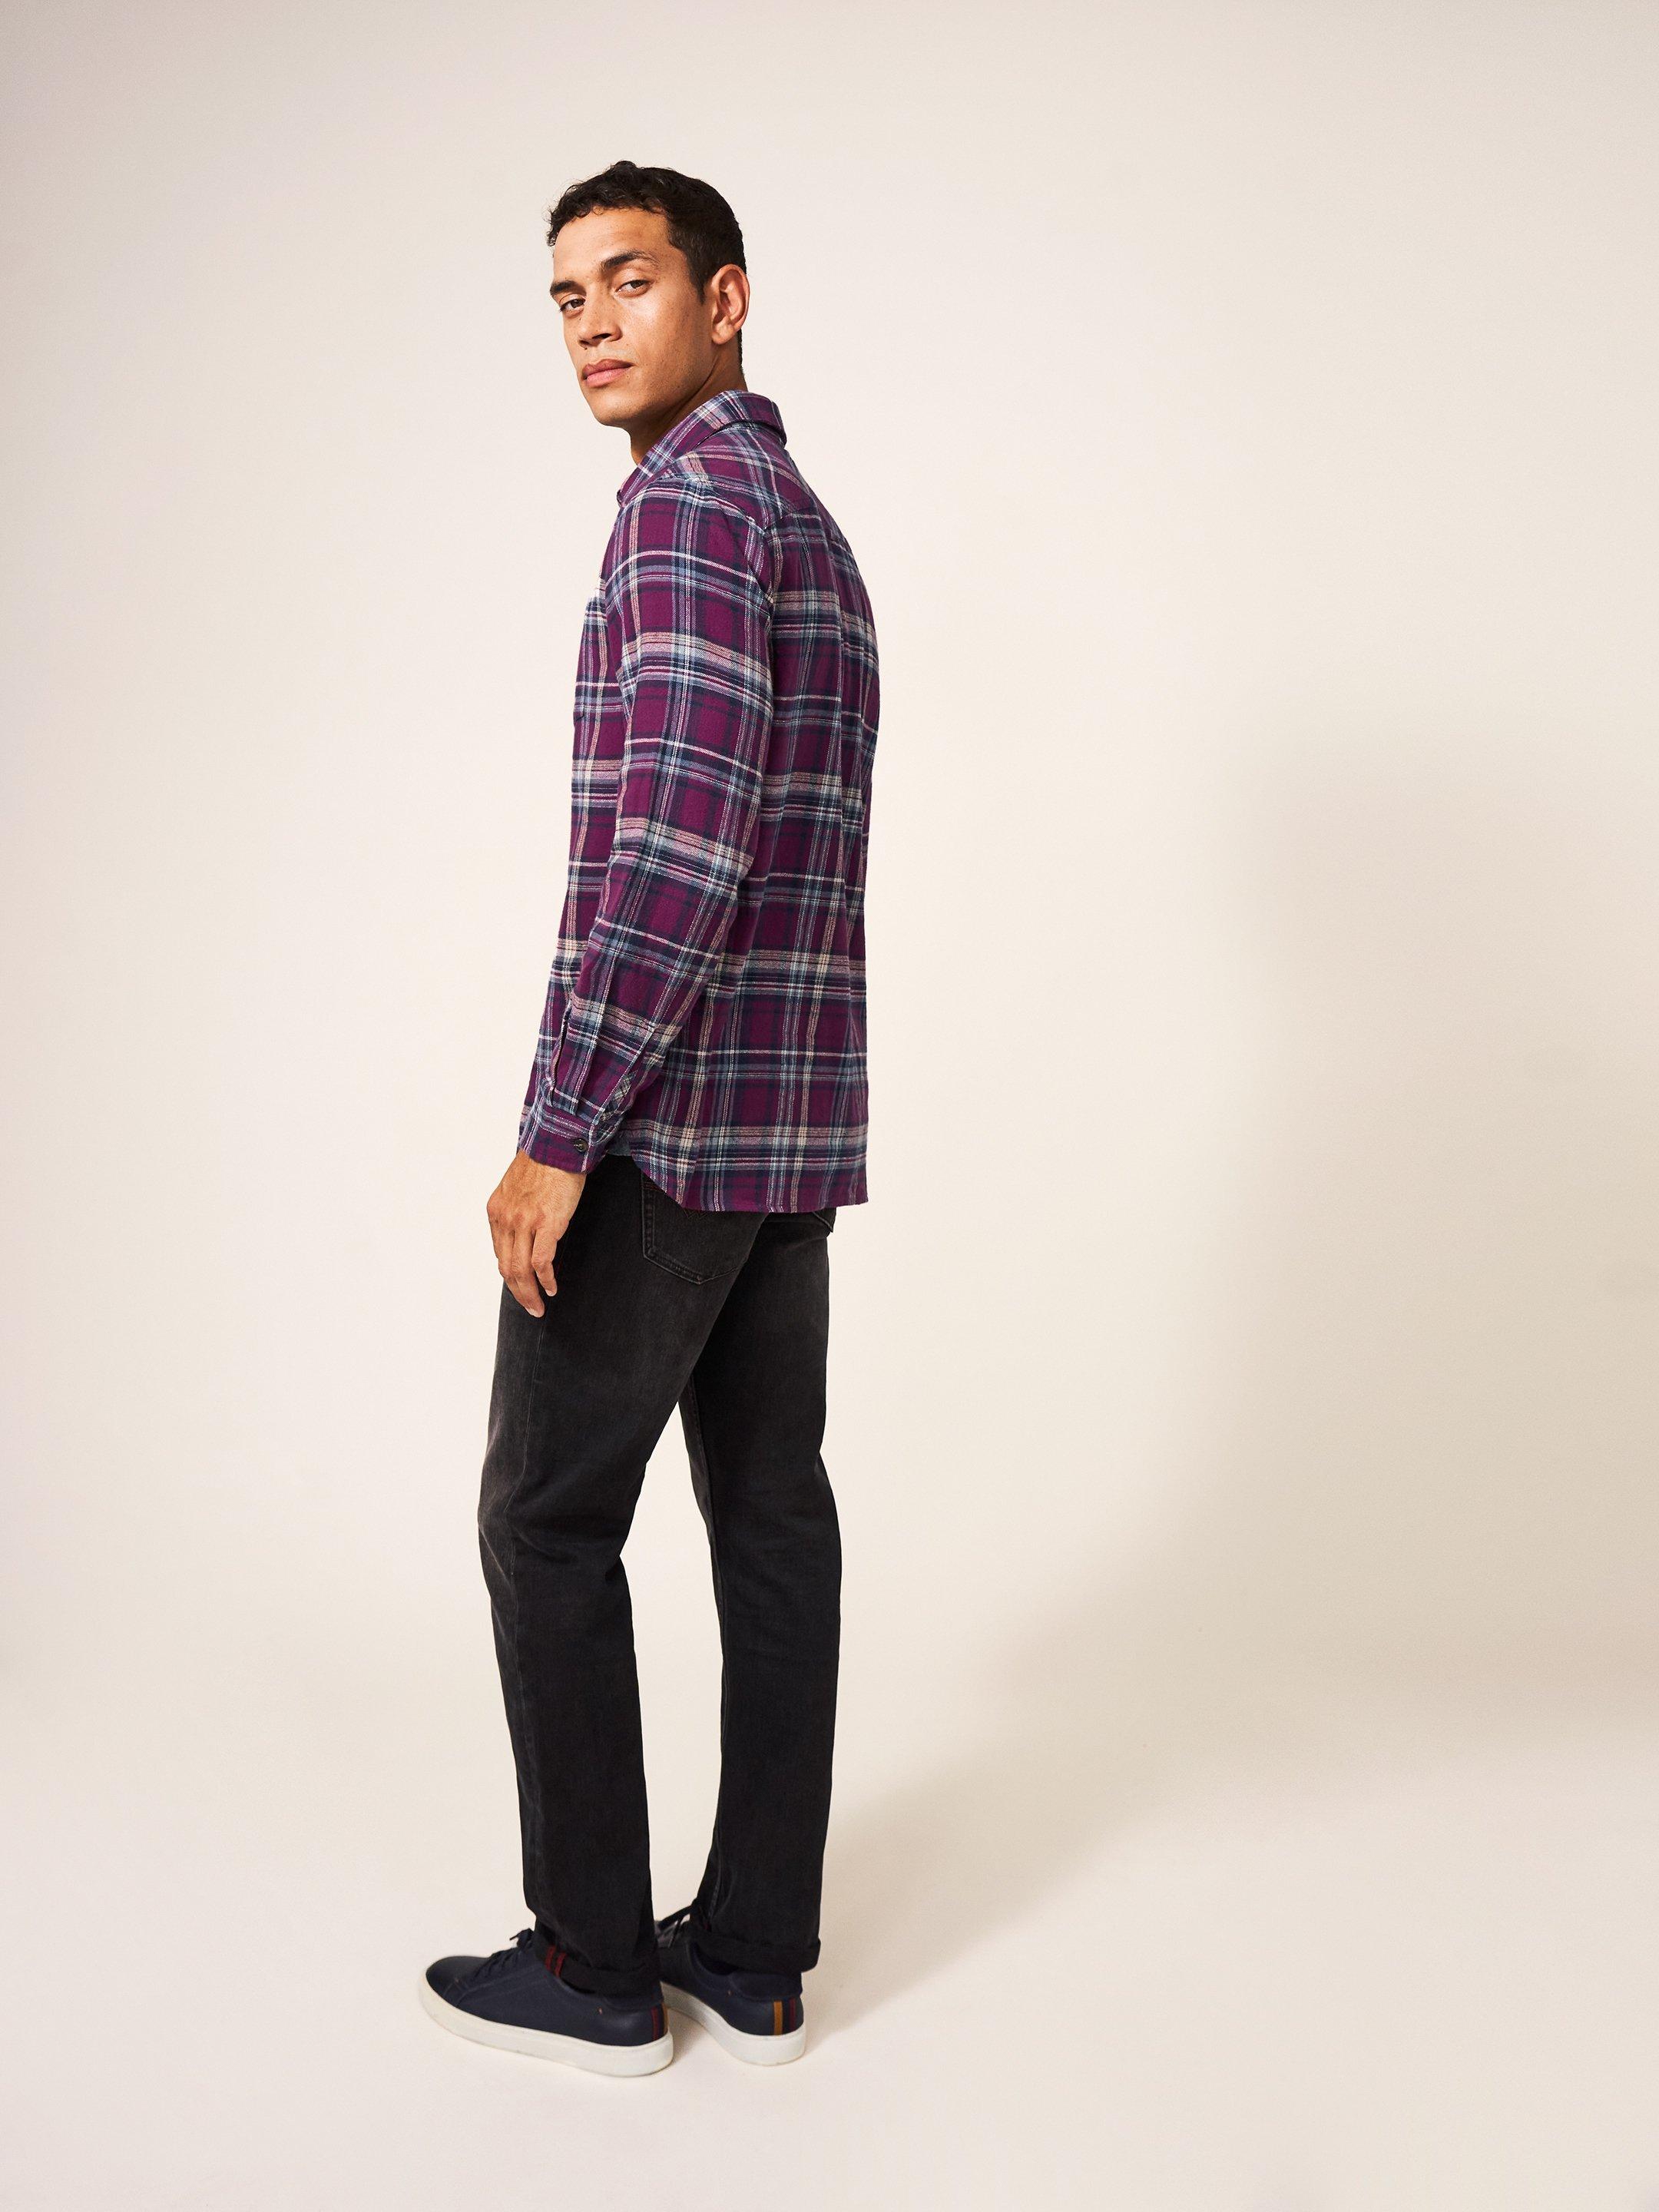 Moxley Flannel Check Shirt in MID PLUM - MODEL BACK